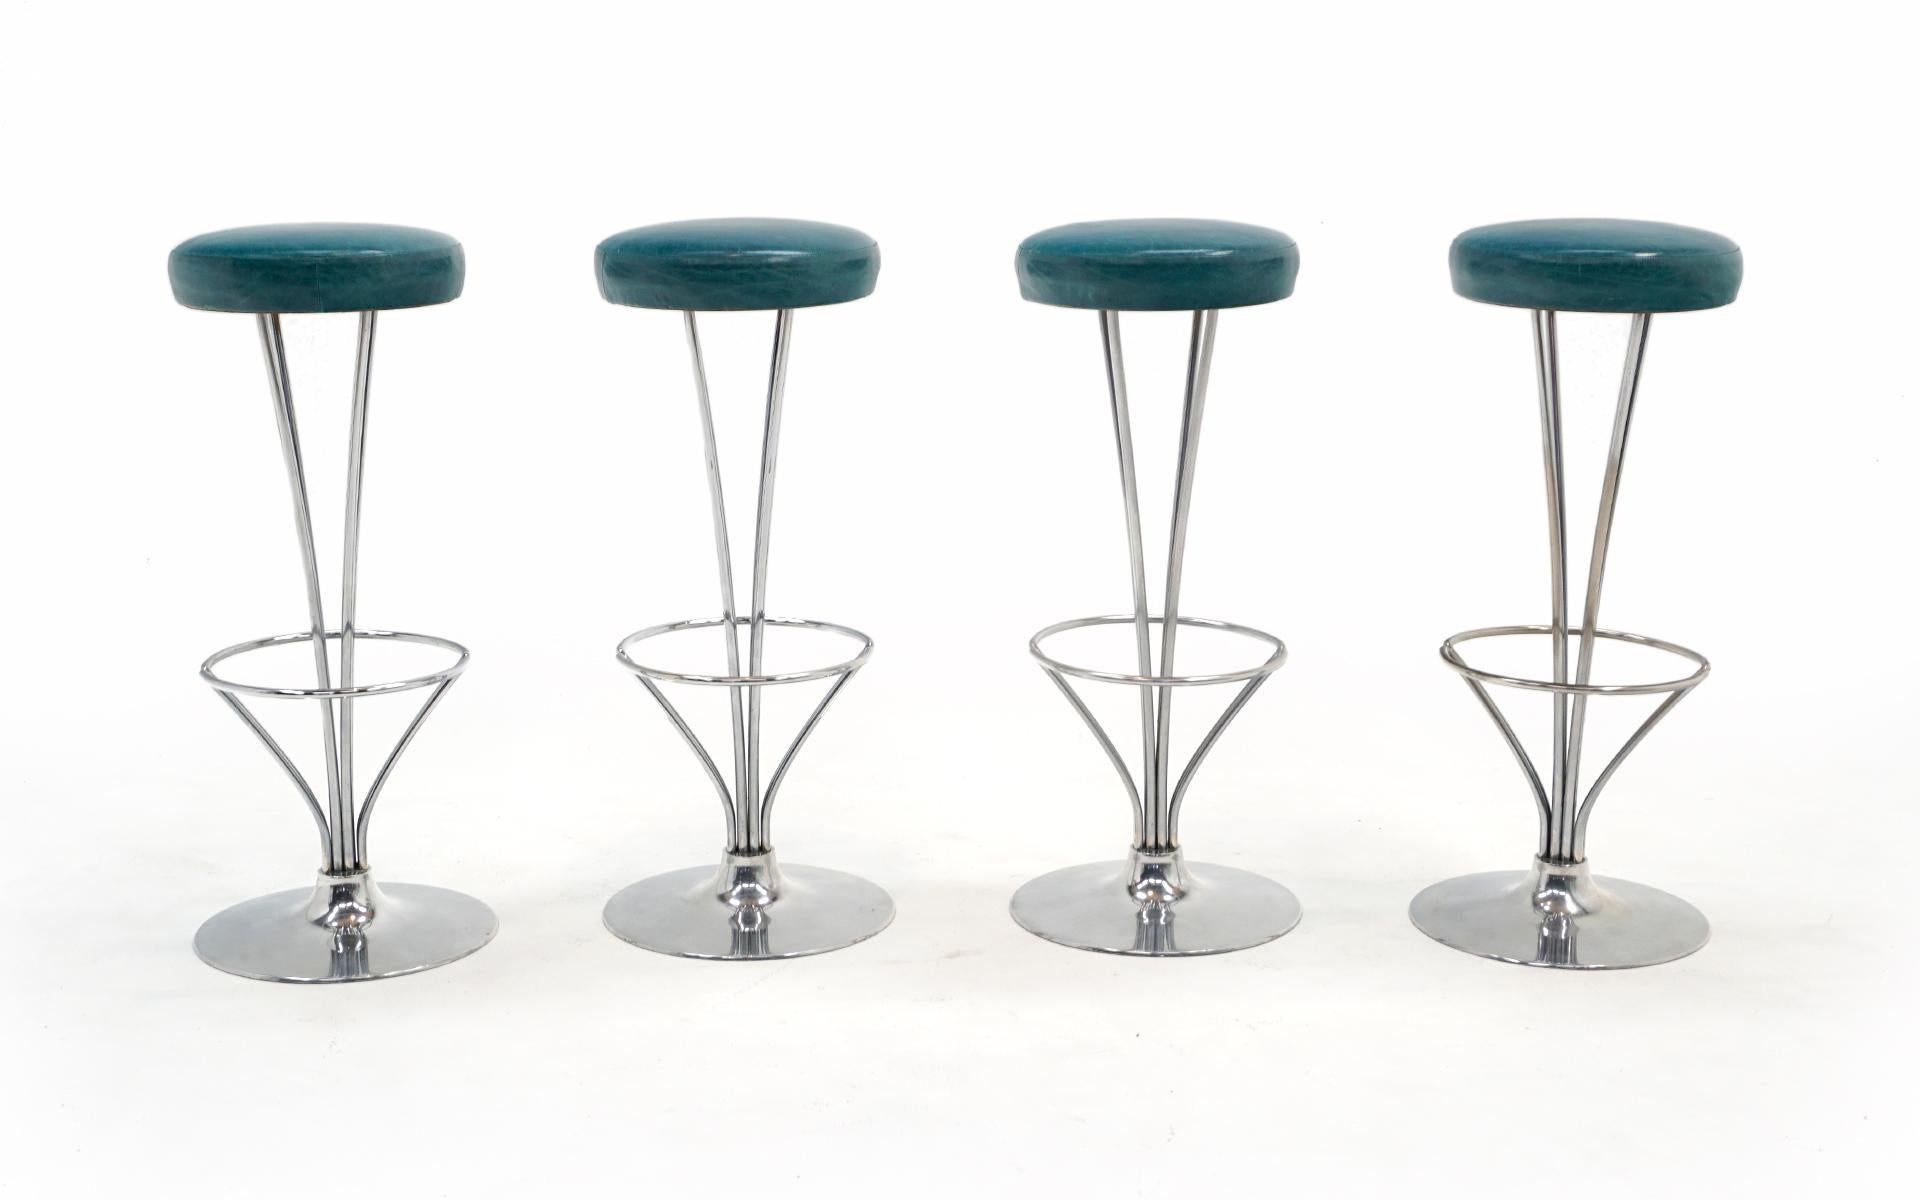 Set of 4 bar stools designed by Piet Hein for Fritz Hansen, Denmark, 1960s. The seats have been reupholstered in the recent past in high quality turquoise blue leather. The frames are made of cast aluminum and chromed steel. These are our favorite